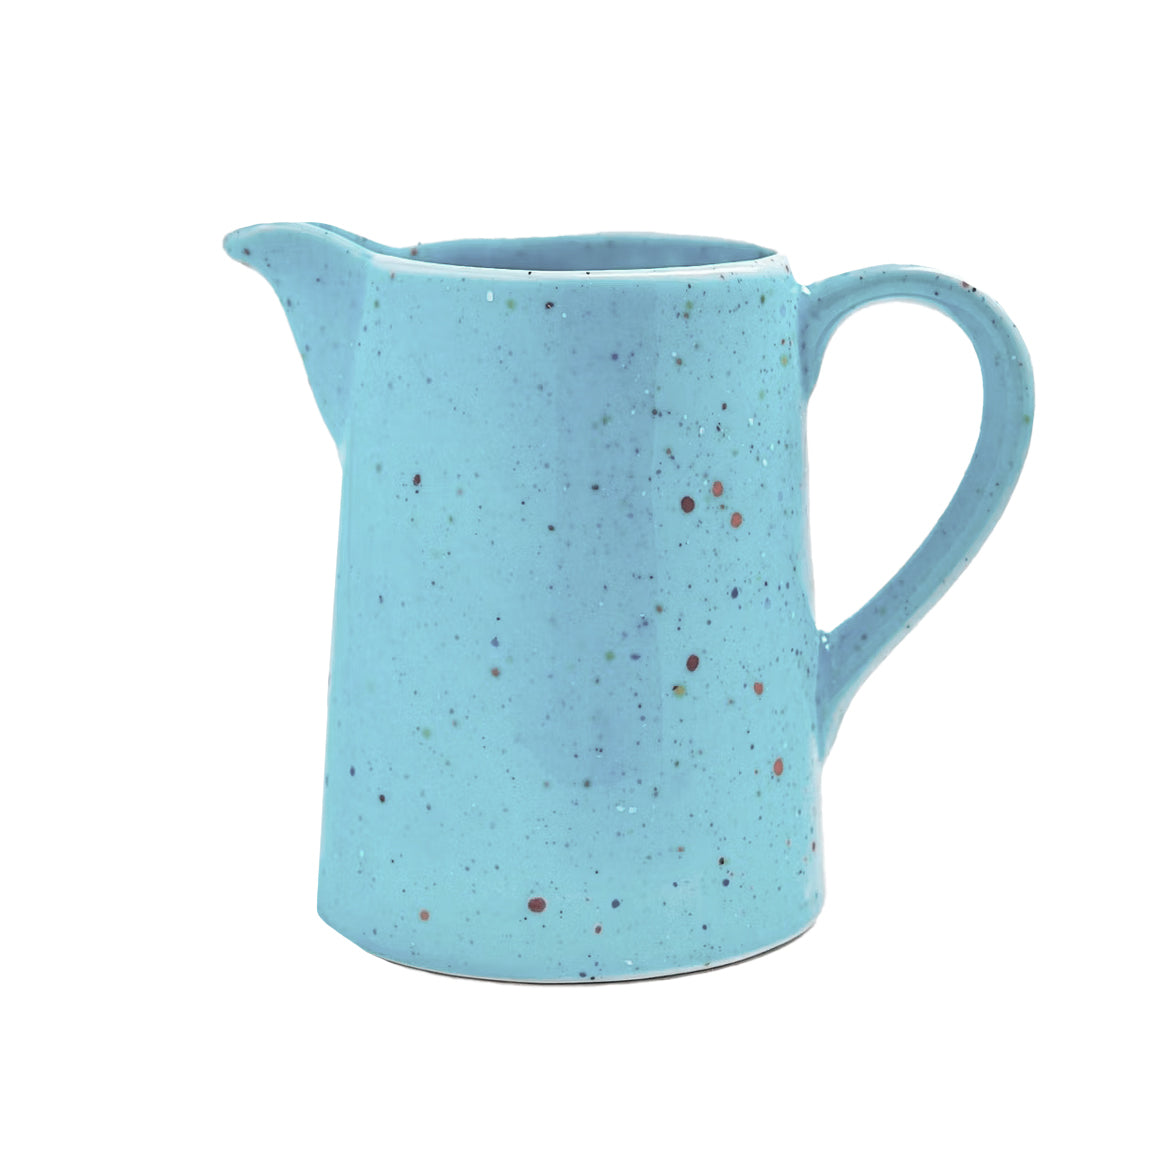 Marbled Enamel Pitcher - small